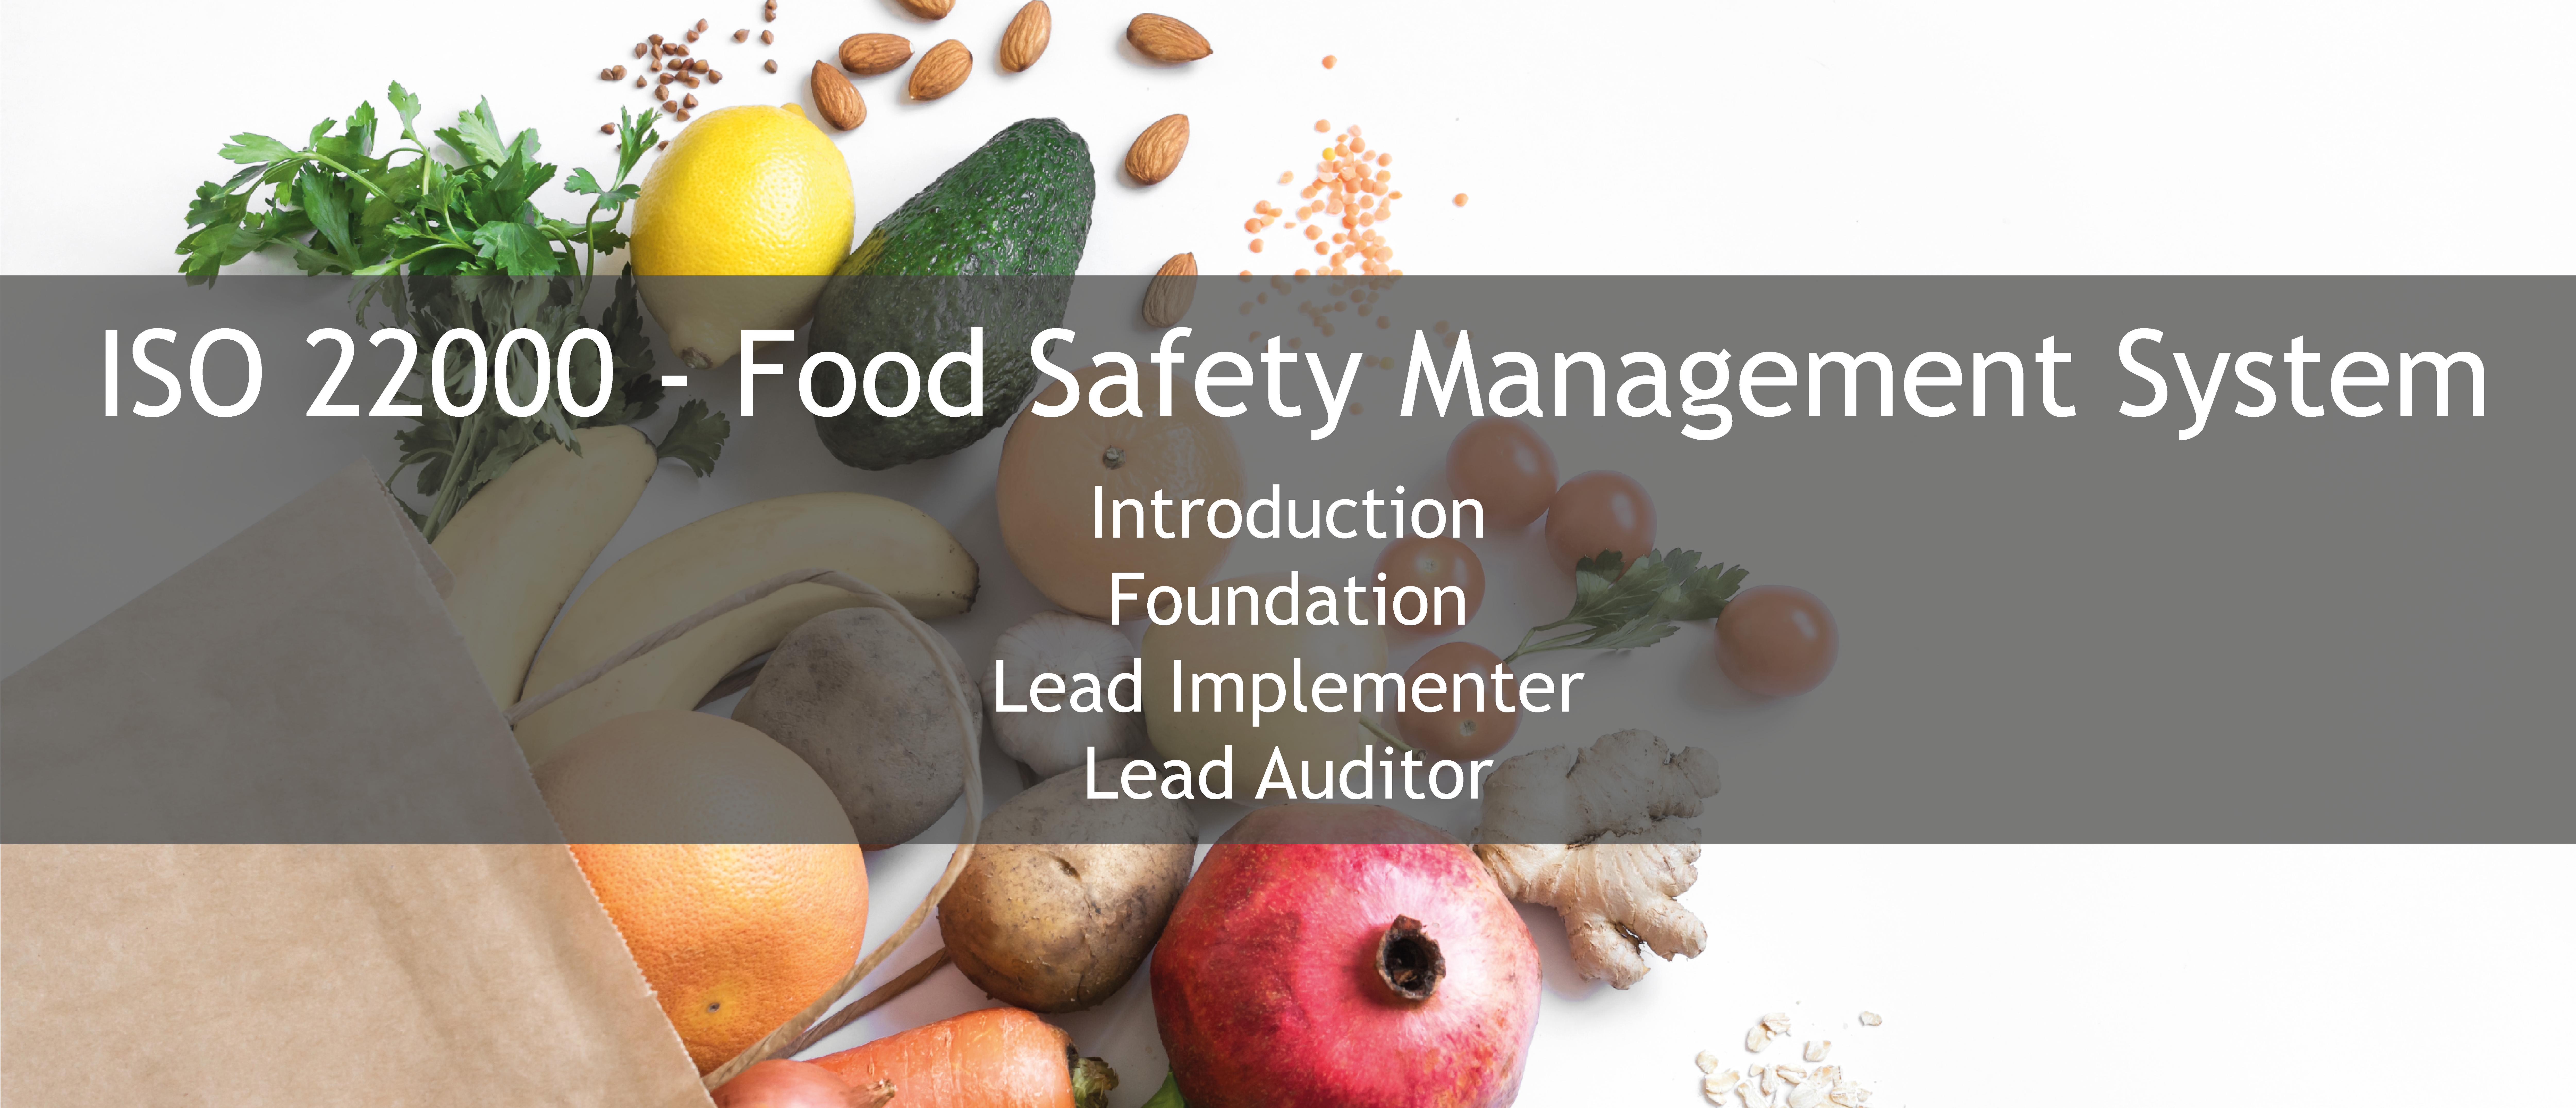 ISO 22000 training offer - ISO 45001 Occupational health and safety management systems